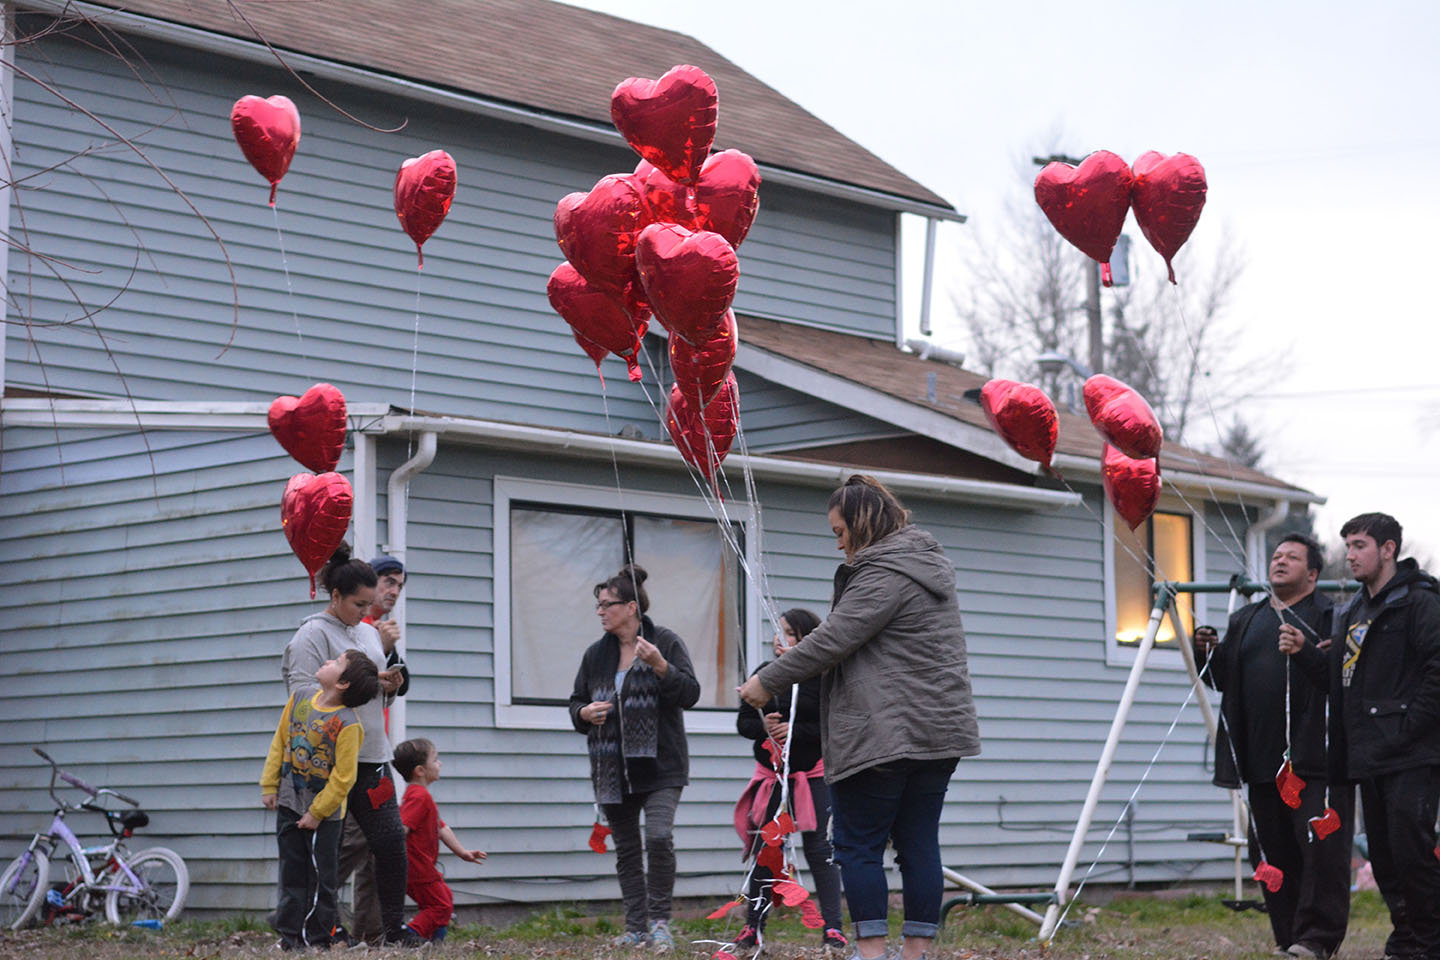 Martin "Tino" Valencia's family prepares to release 20 balloons on Tuesday as tribute to his memory. Tino was killed while riding his bike last August.